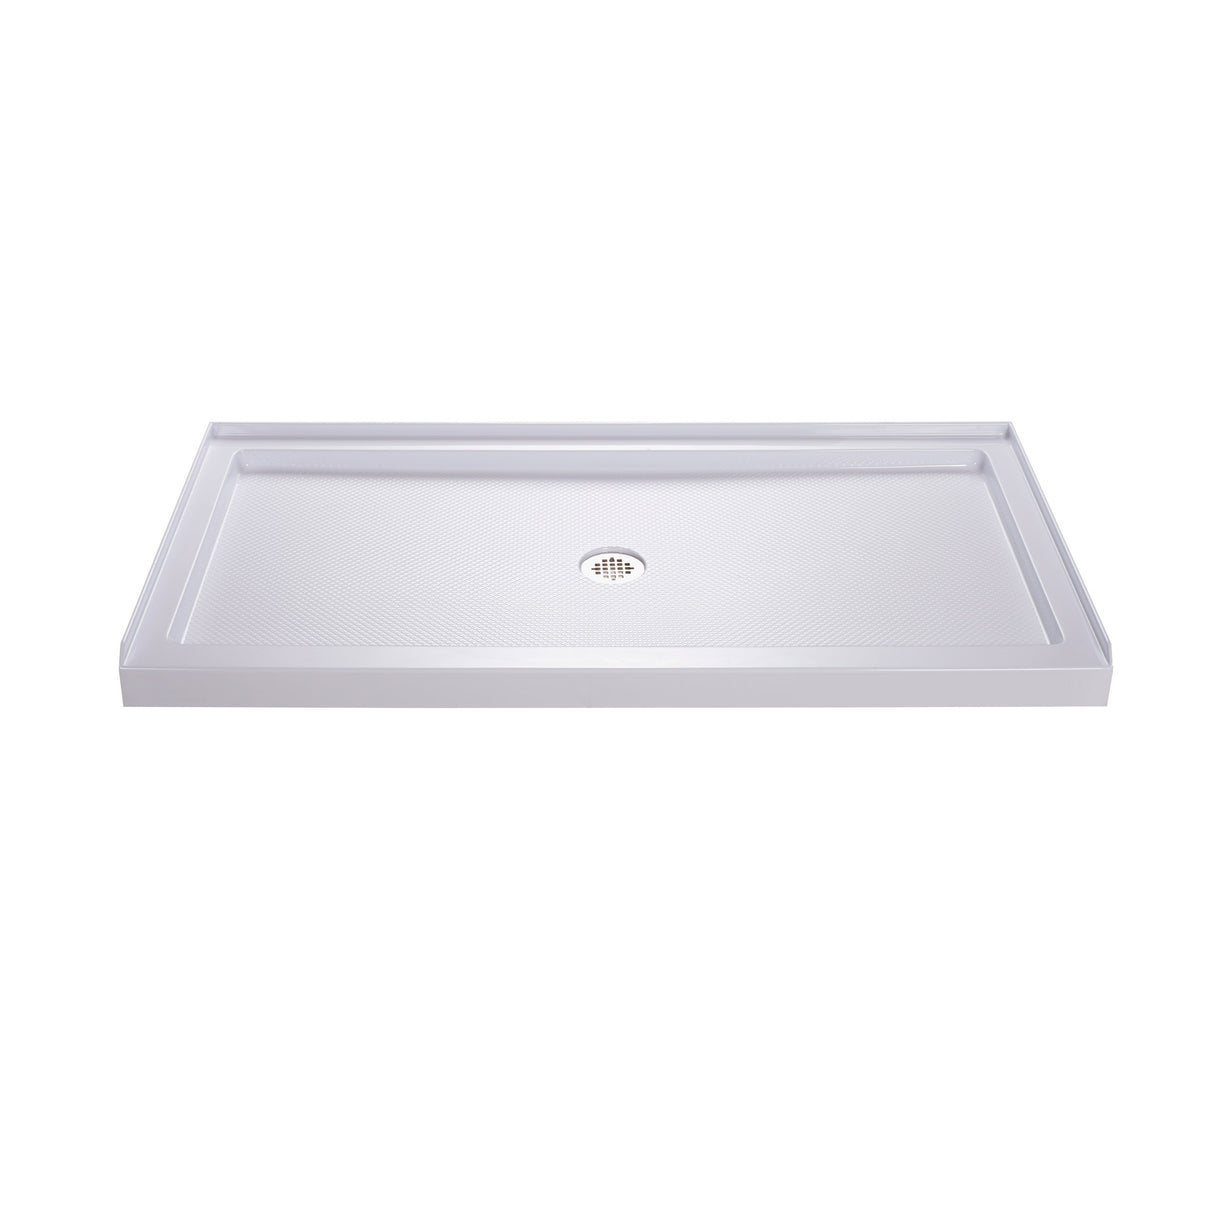 DreamLine Duet 36 in. D x 60 in. W x 74 3/4 in. H Semi-Frameless Bypass Shower Door in Brushed Nickel and Center Drain White Base